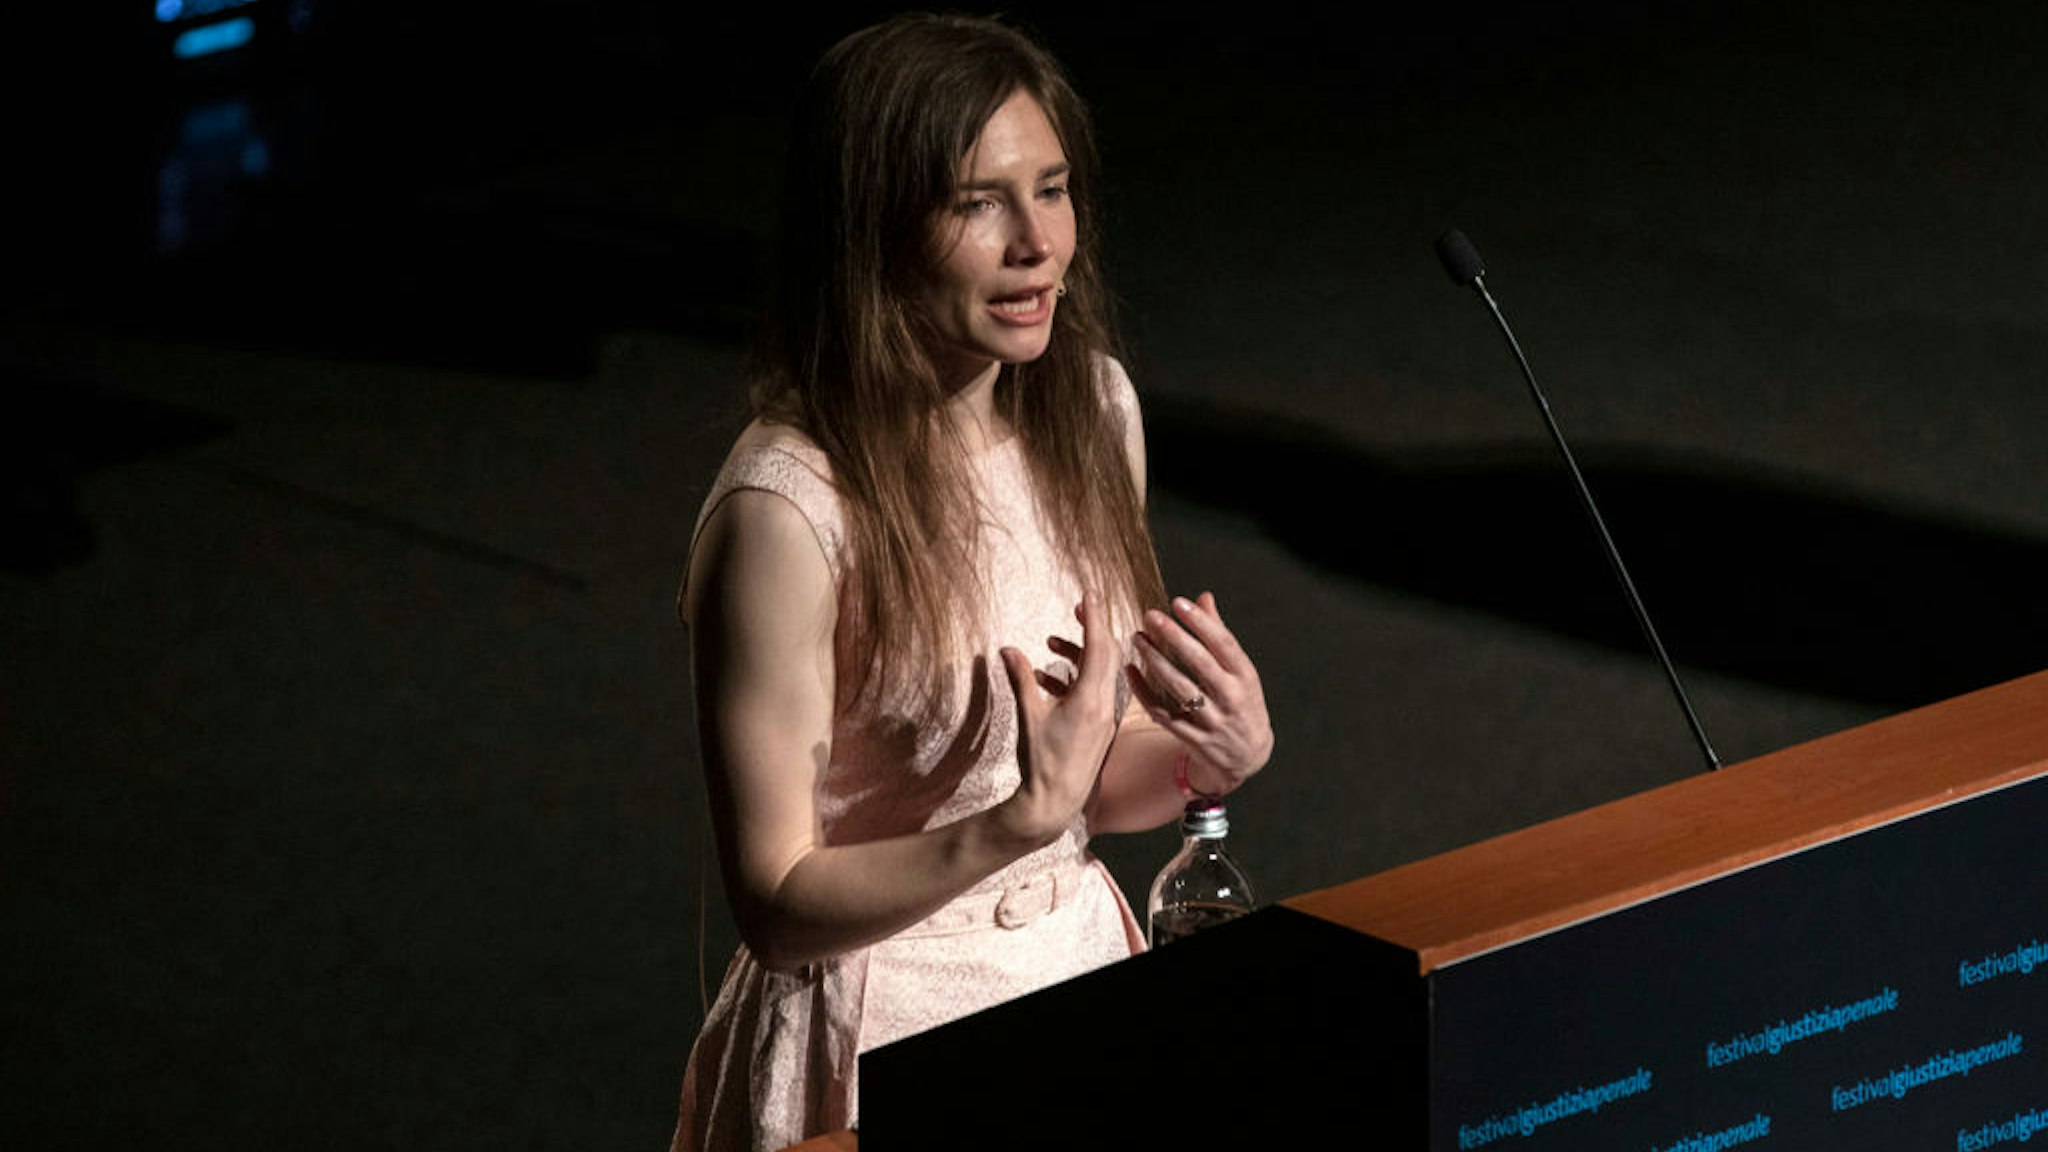 American journalist Amanda Knox delivers a speech during a panel session entitled 'Trial by Media' during the first edition of the Criminal Justice Festival, an event organised by The Italy Innocence Project and the local association of barristers, on June 15, 2019 in Modena, Italy.